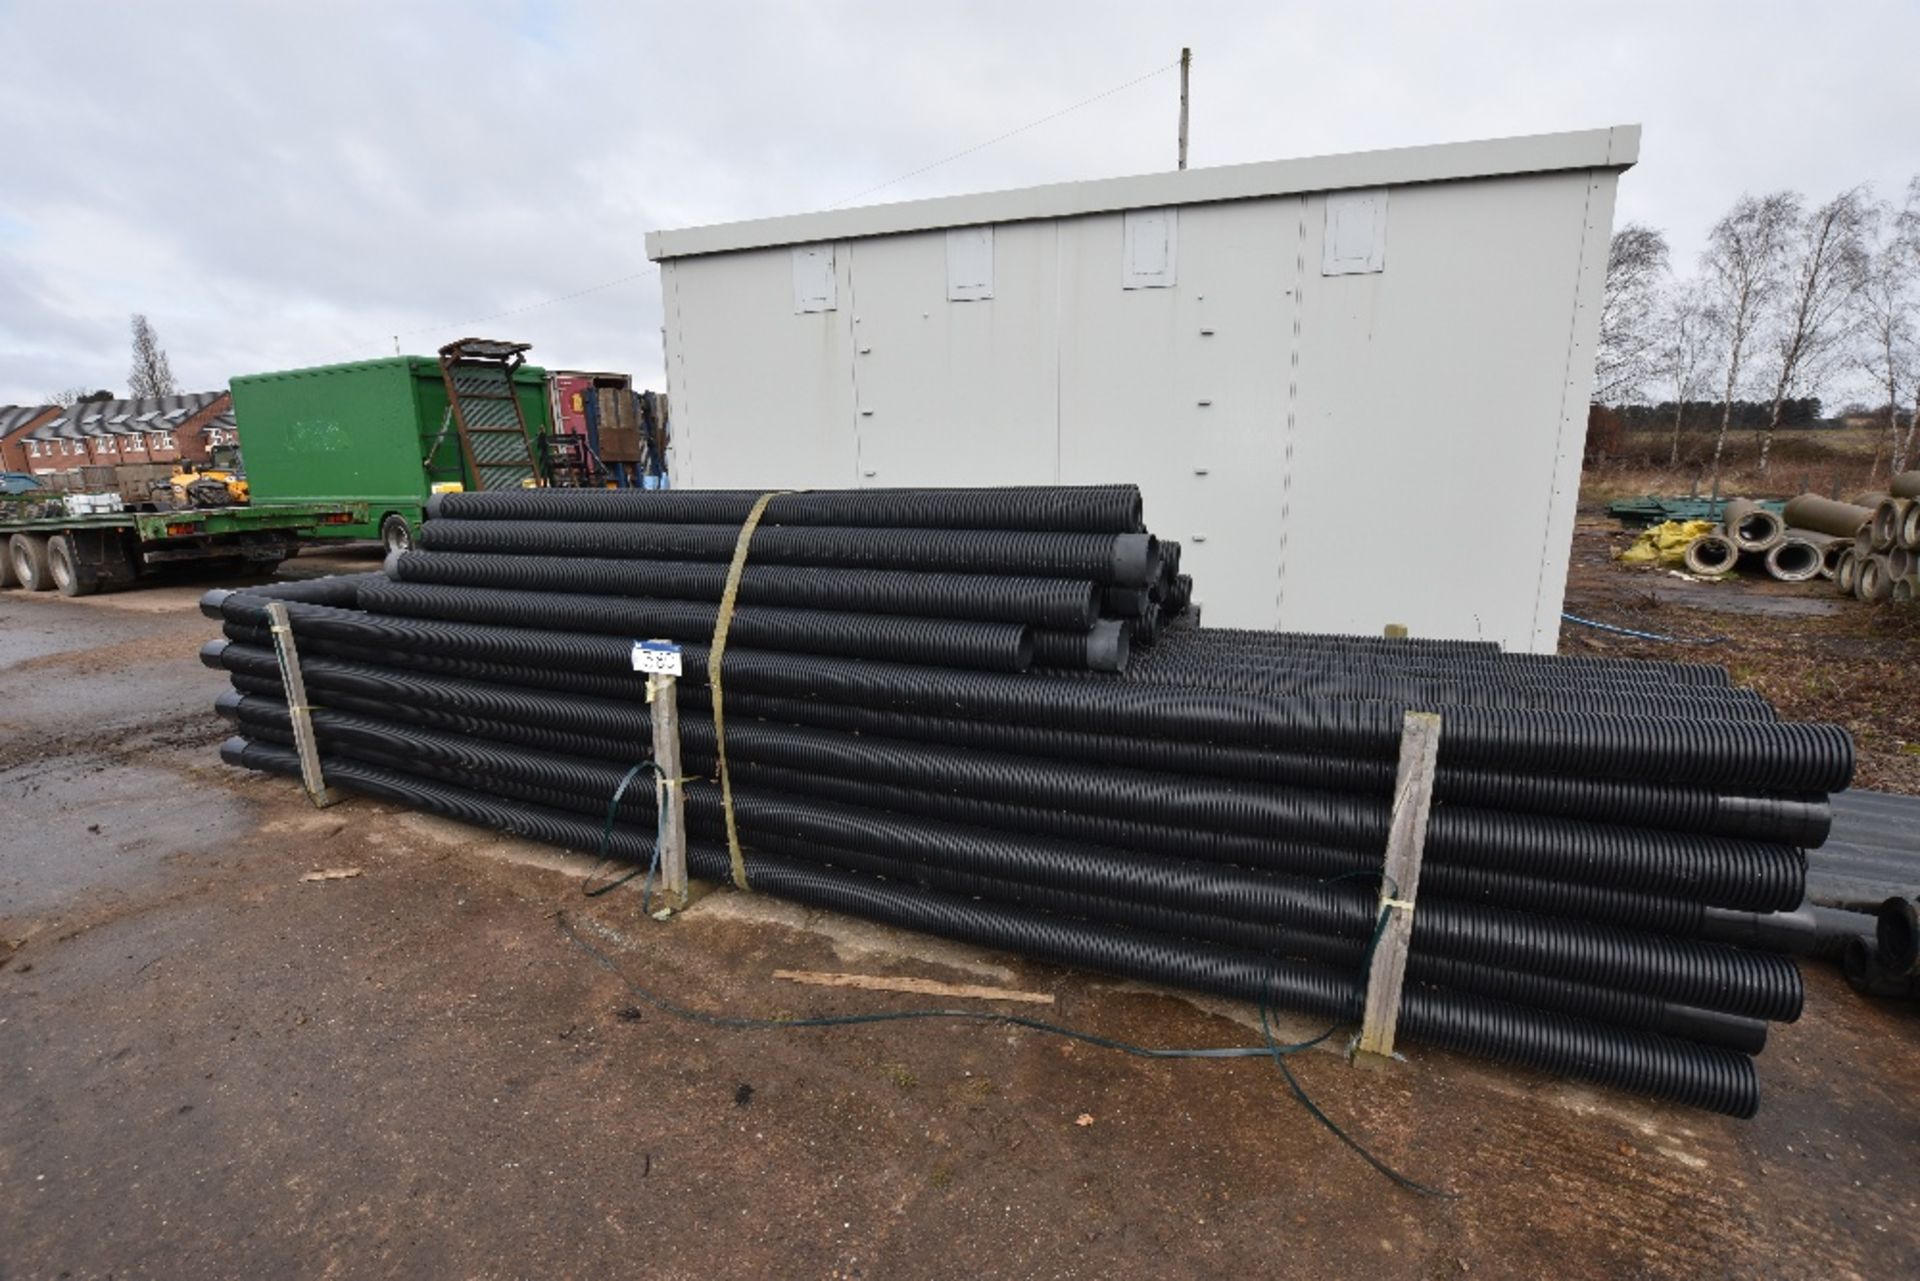 52 x Lengths of Black Plastic Electric Cable Ducting, 6m x 160mm Diameter, 20 Lengths of Black